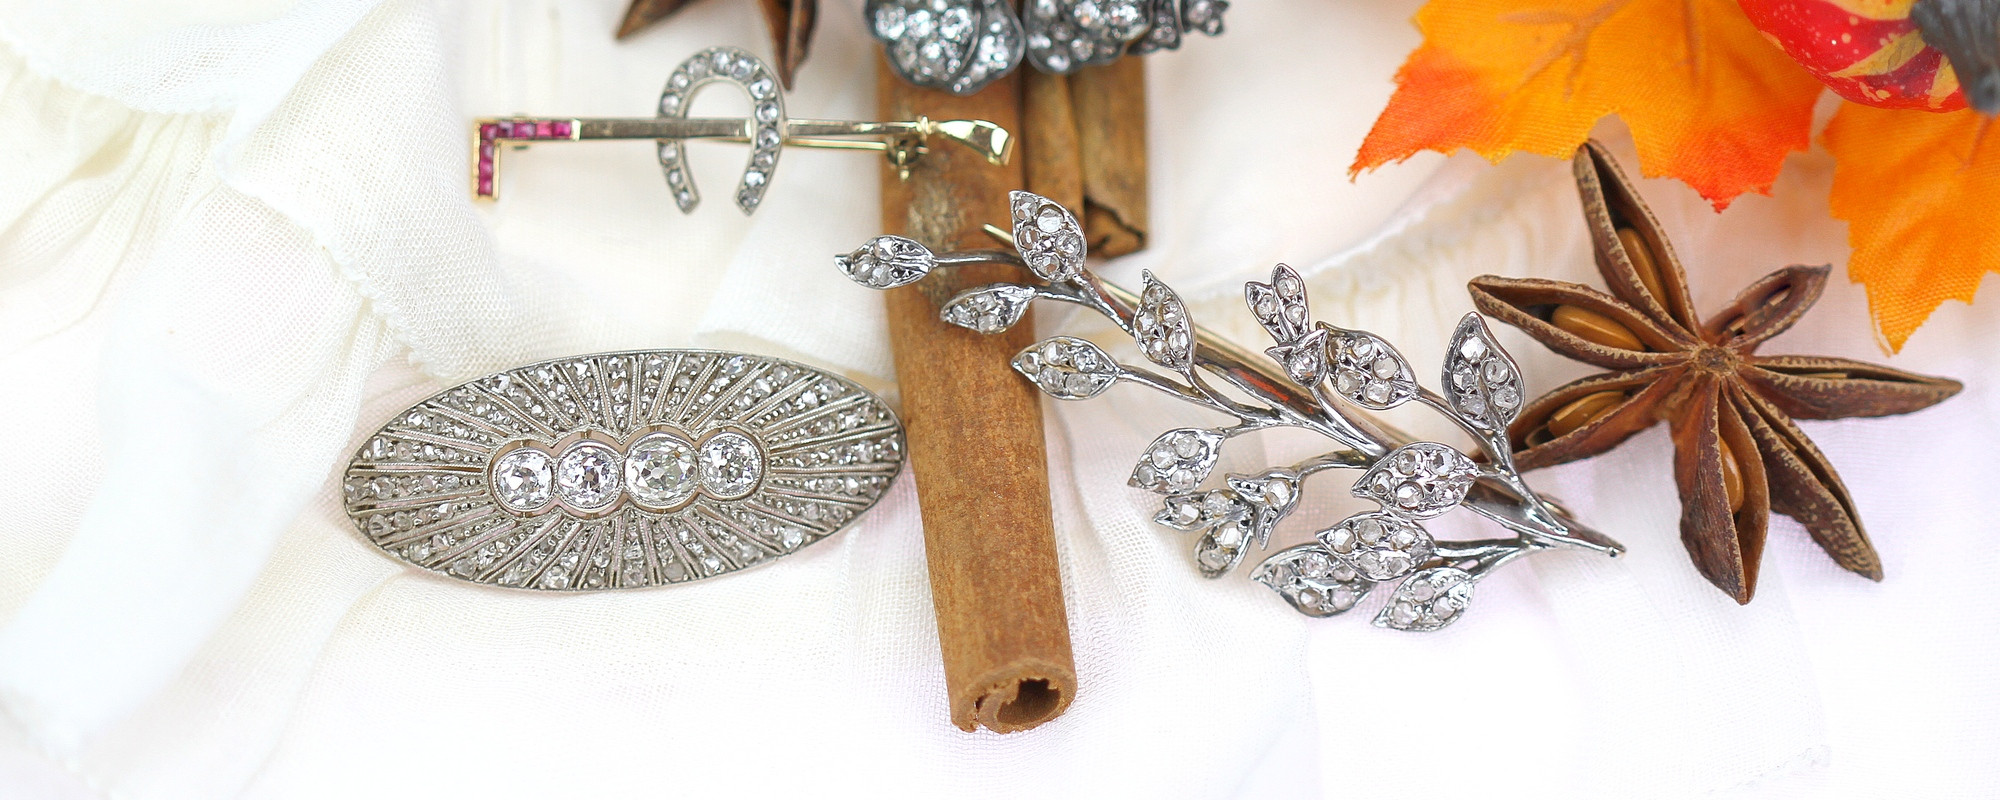 How about pinning on a brooch?